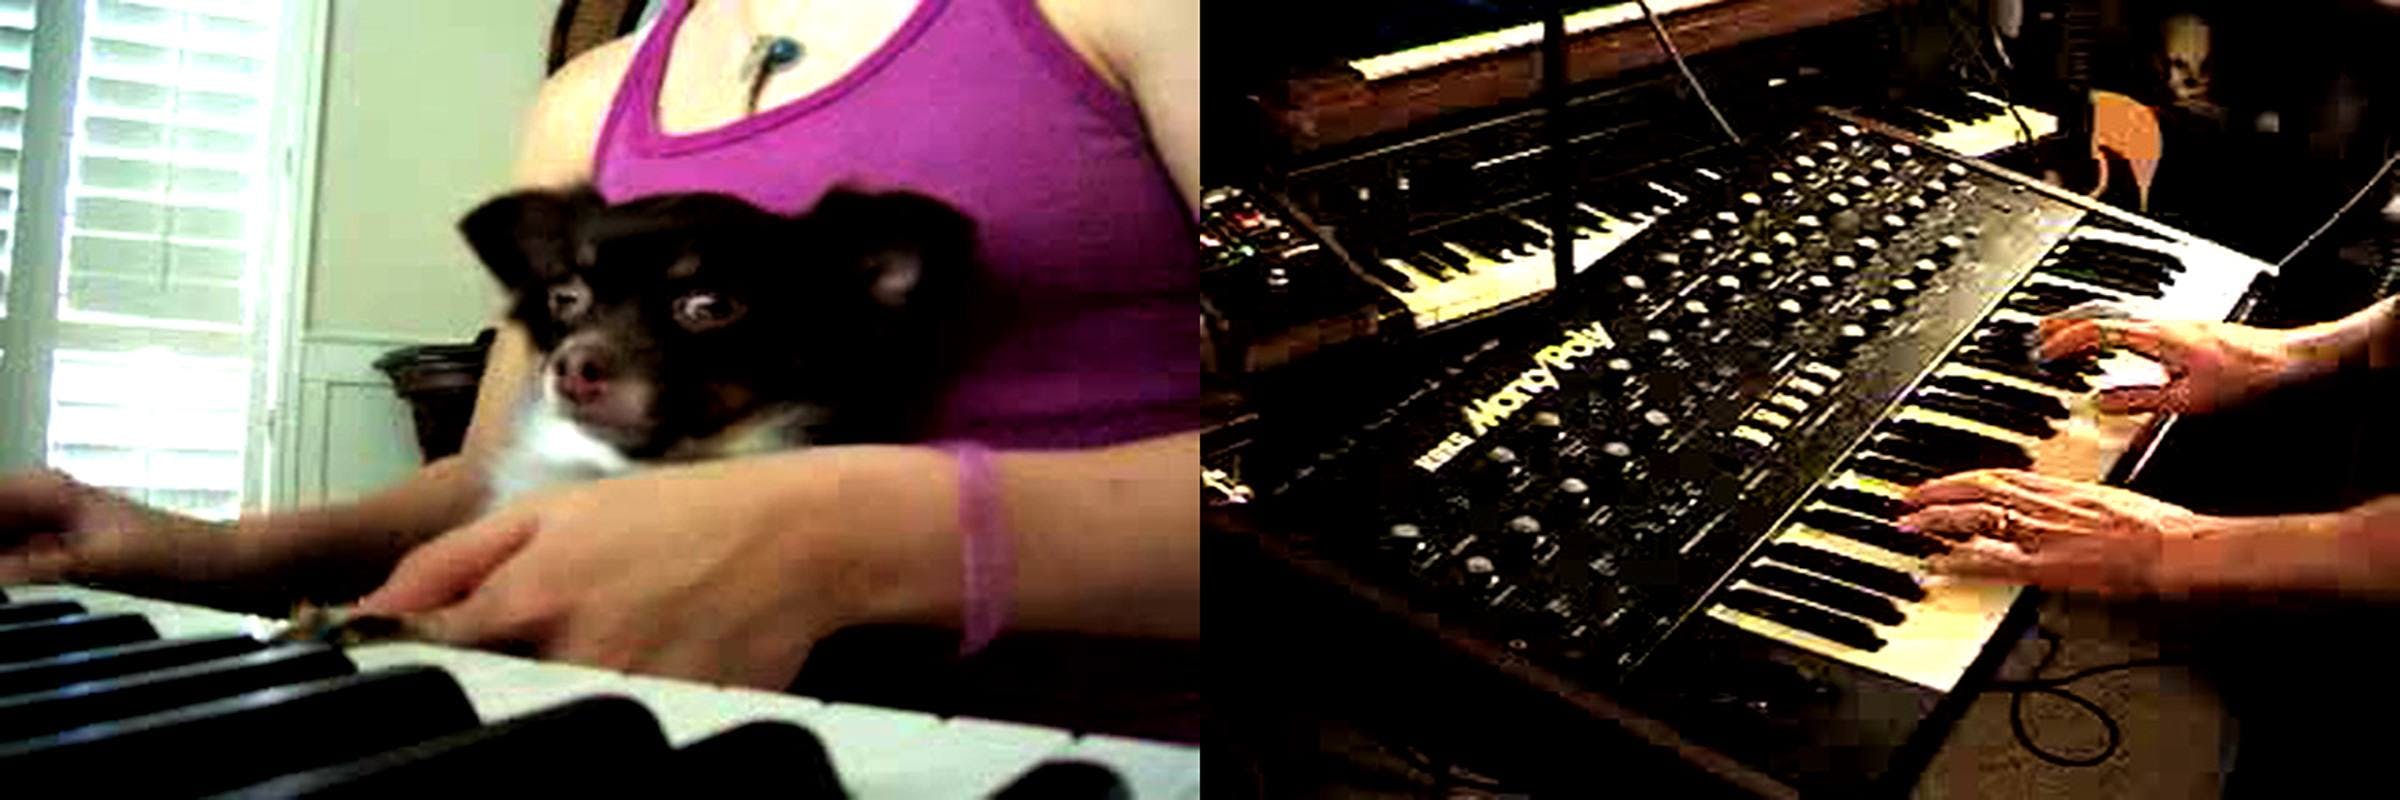 Image split into two halves. On the left, a person sits at a piano with a dog on their lap. On the right, we see a piano from above with two hands playing it